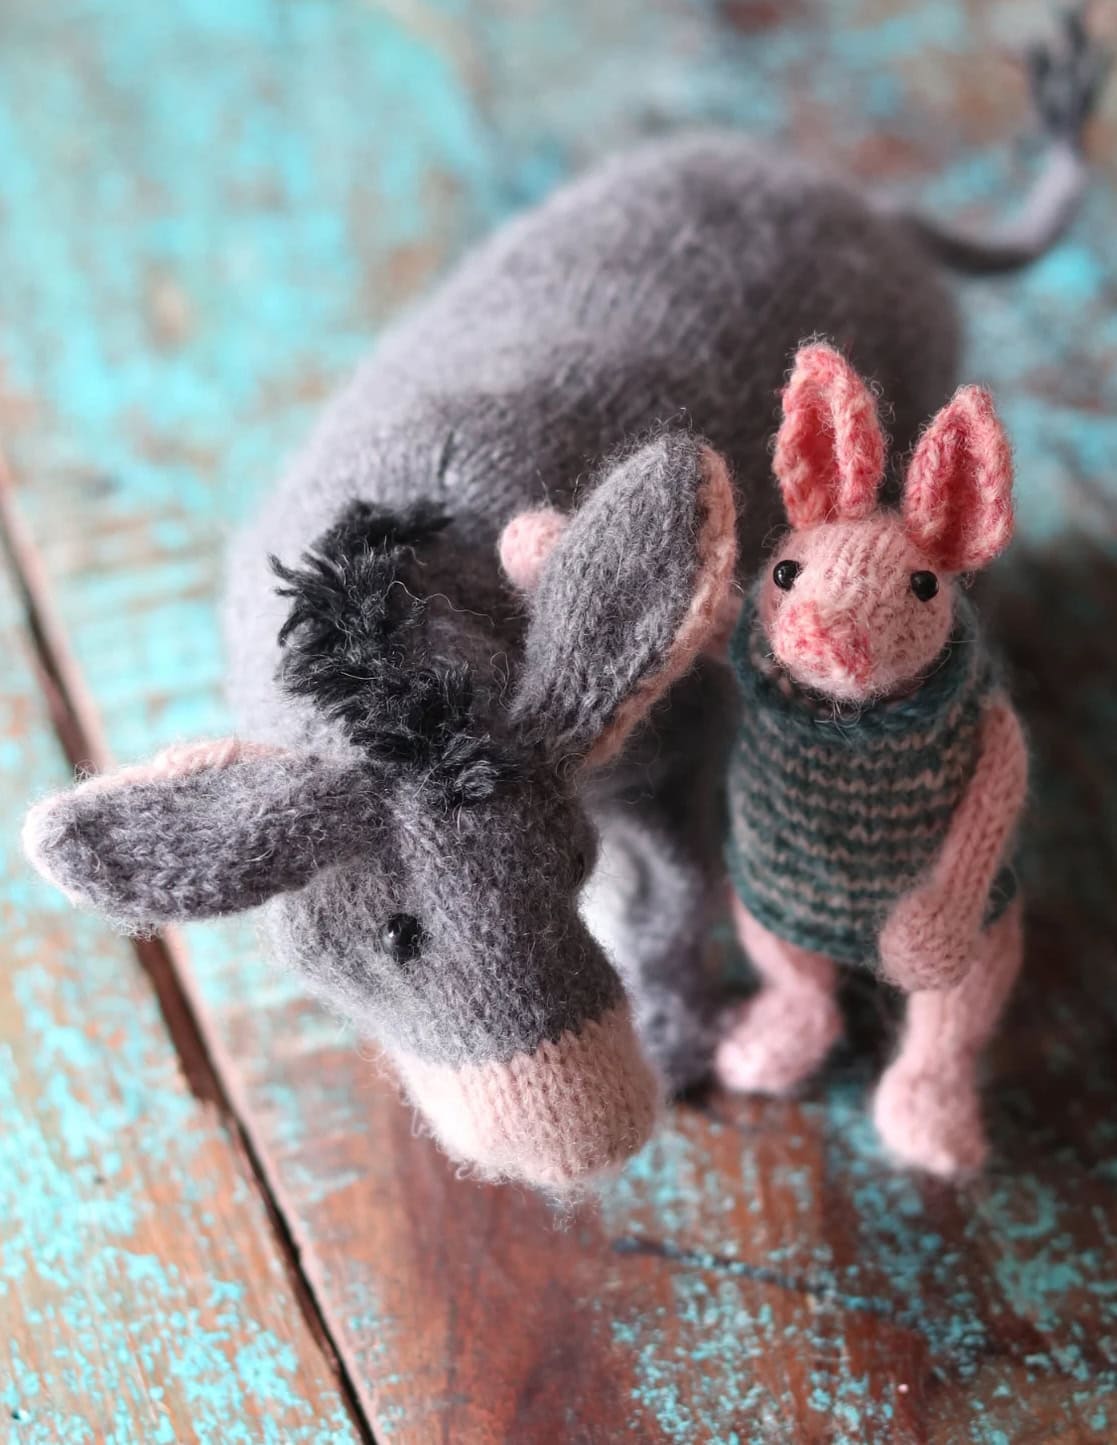 eeyore and piglet knitting patterns by claire garland part of her winnie the pooh collection of patterns that also includes Piglet and Pooh Bear-inspired Honey Bear knitted dolls to make. Read my post to get all the info you need to get the PDF digital pattern now and start knitting! There are lots of gorgeous photos and adorable video of Eeyore too! X